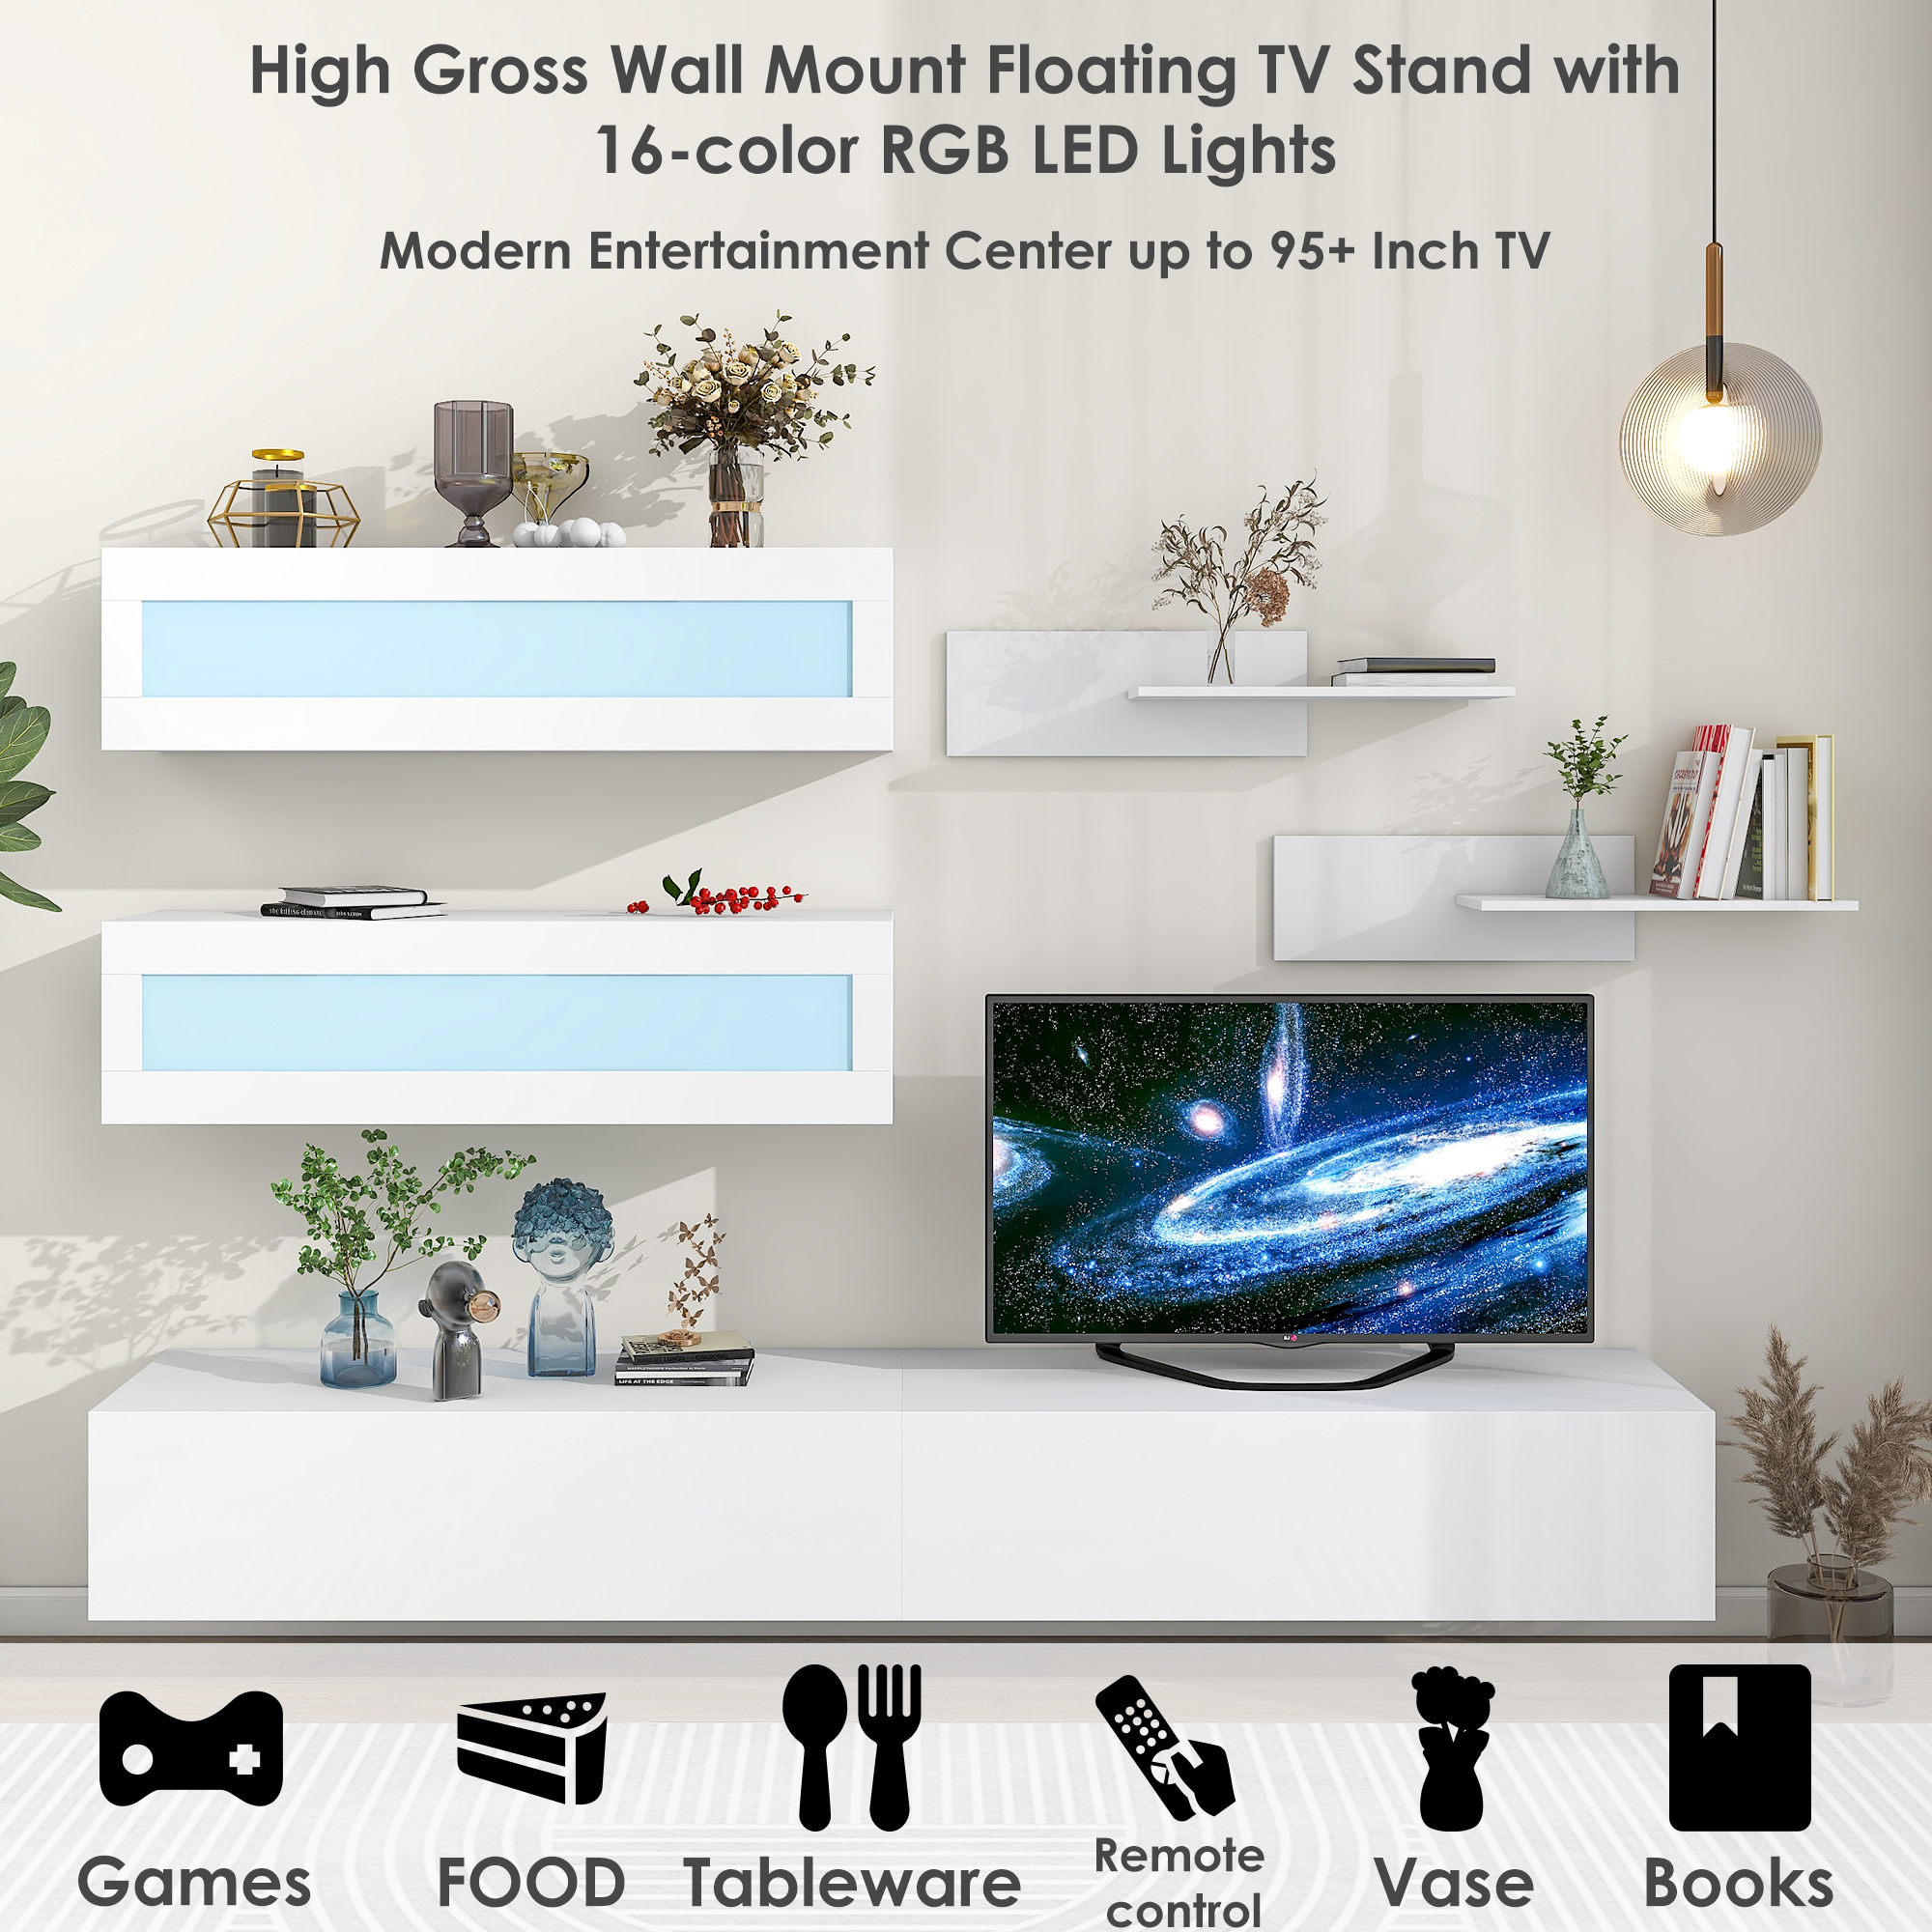 Wall Mount Floating TV Stand with Four Media Storage Cabinets and Two Shelves, Modern High Gross Entertainment Center for 95& inch TV, 16-Color Rgb Led Lights for Living Room, Bedroom, White - image 3 of 9